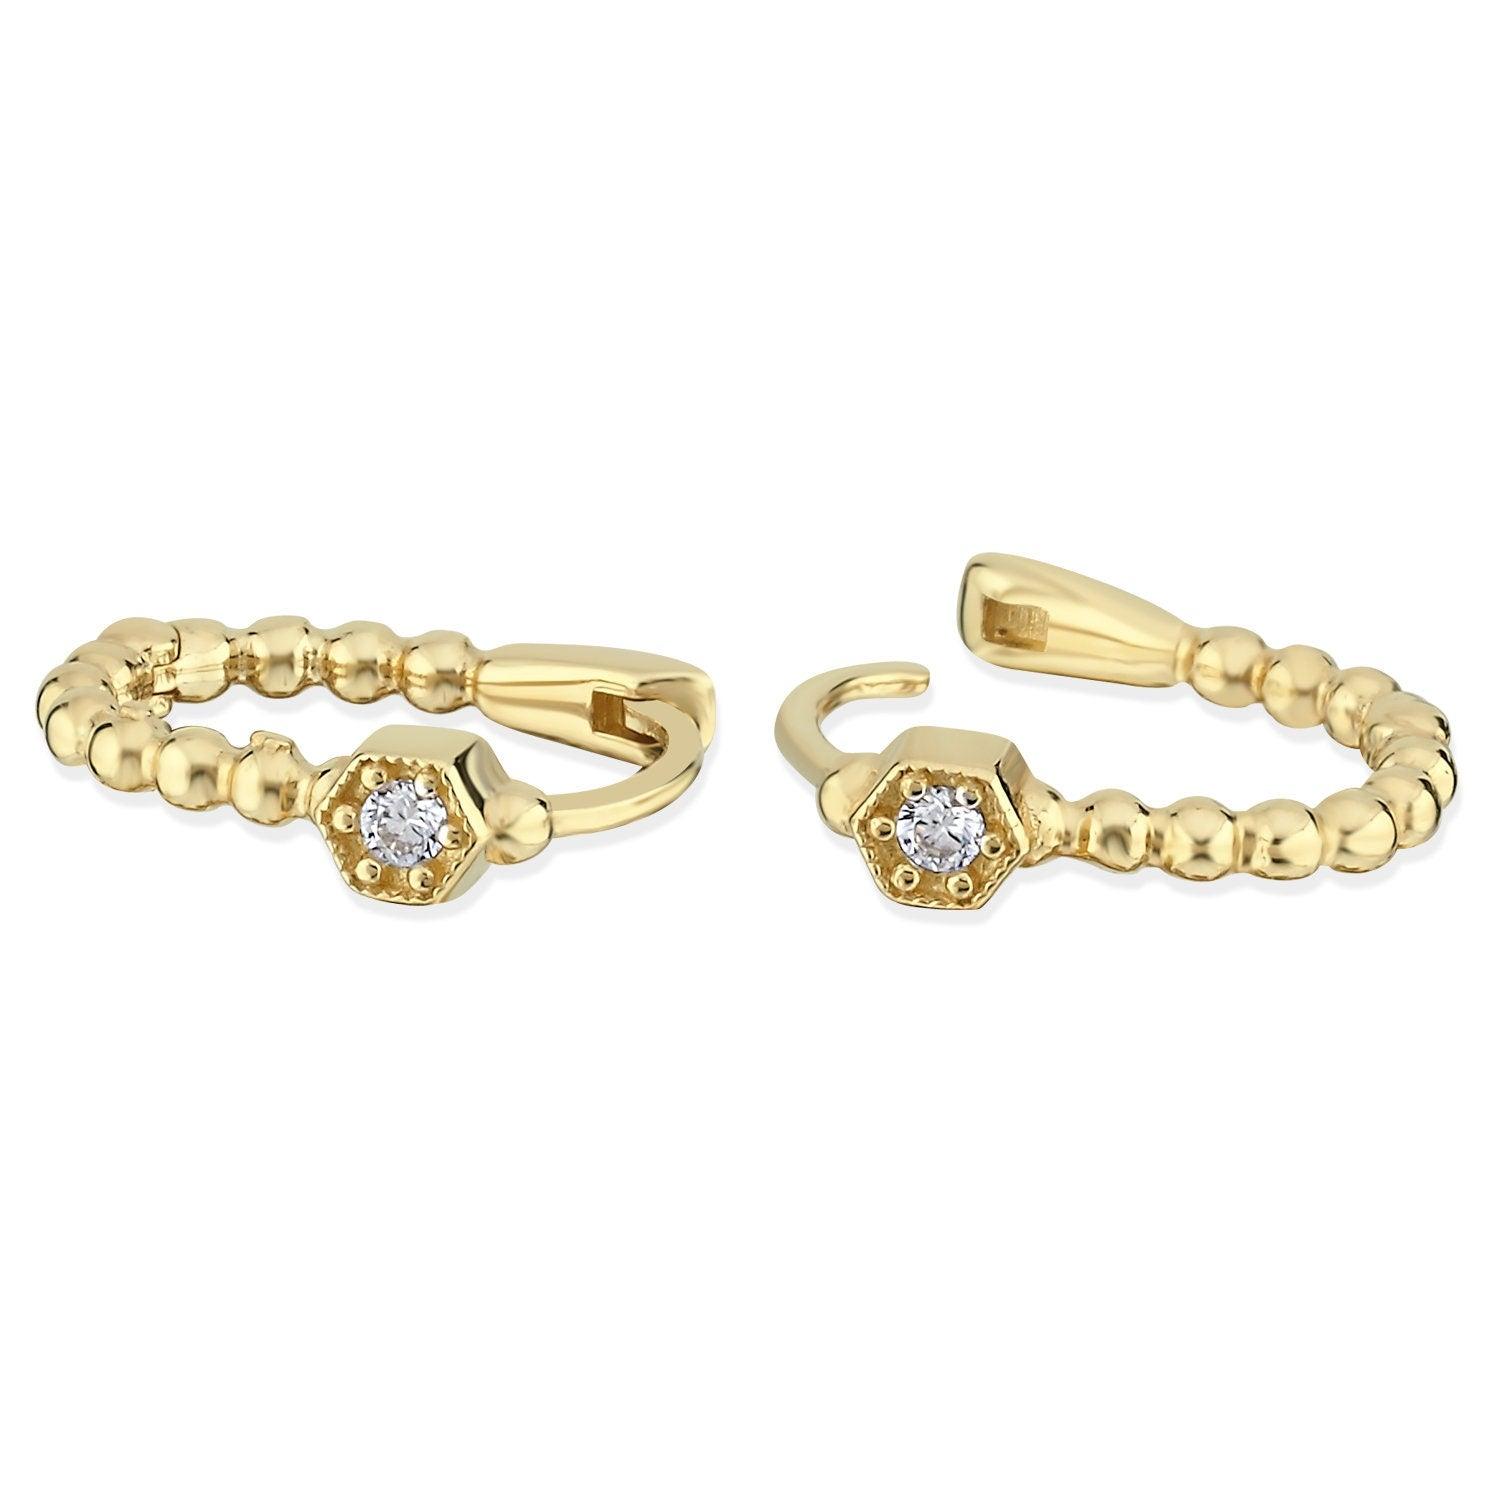 14K Gold Granulation with Stone Earrings